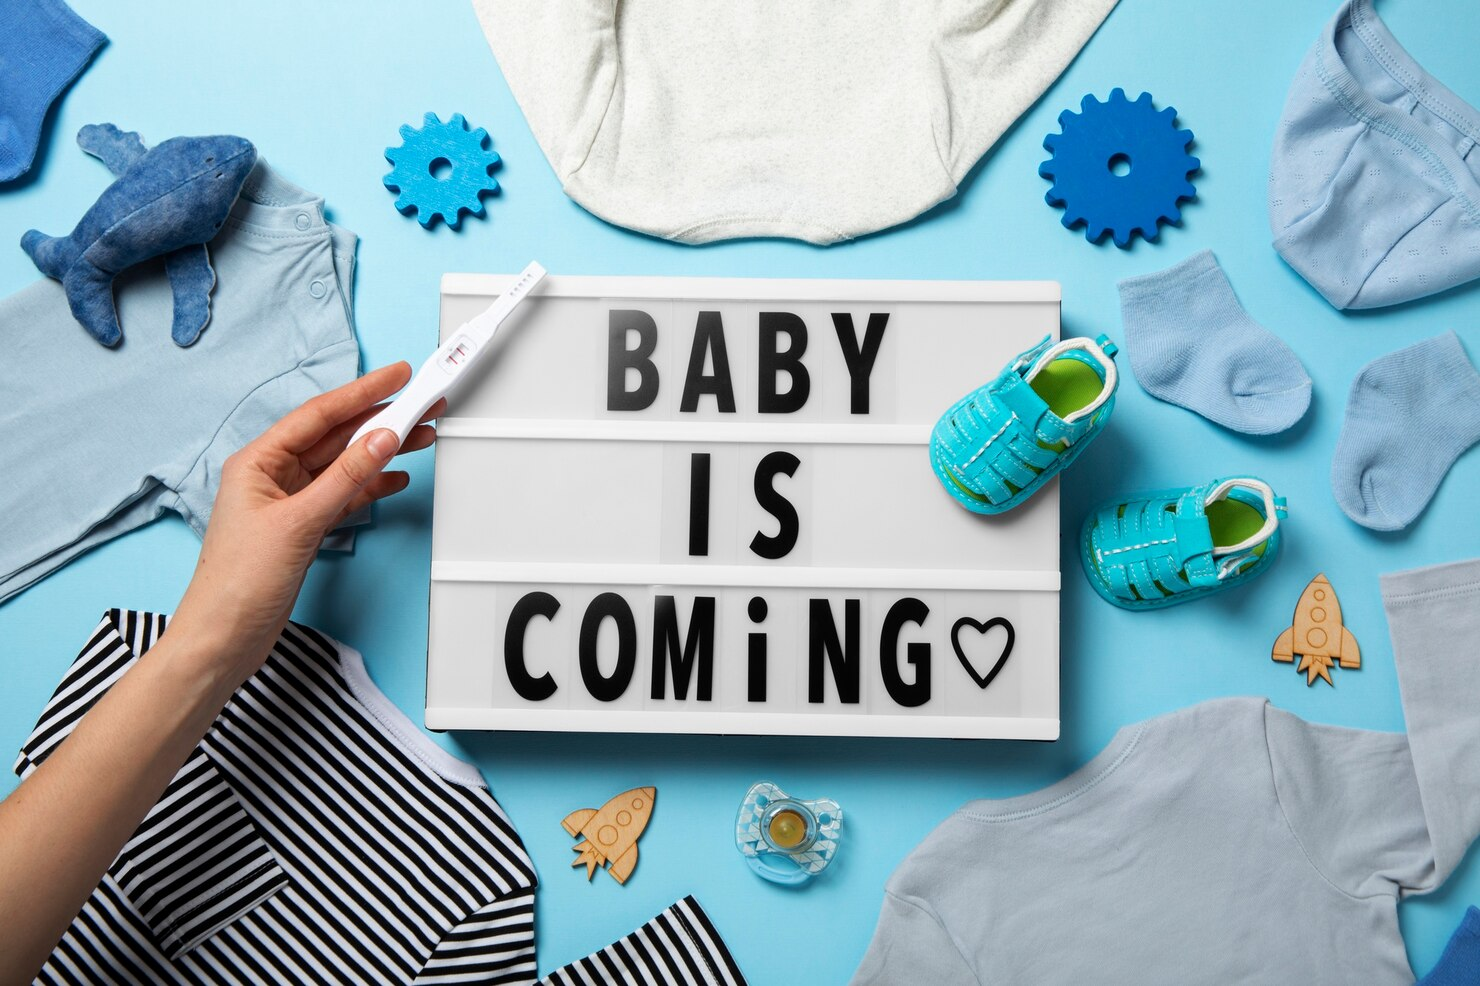 A woman holding a positive pregnancy test against a sign that says "baby is coming" with baby things around.